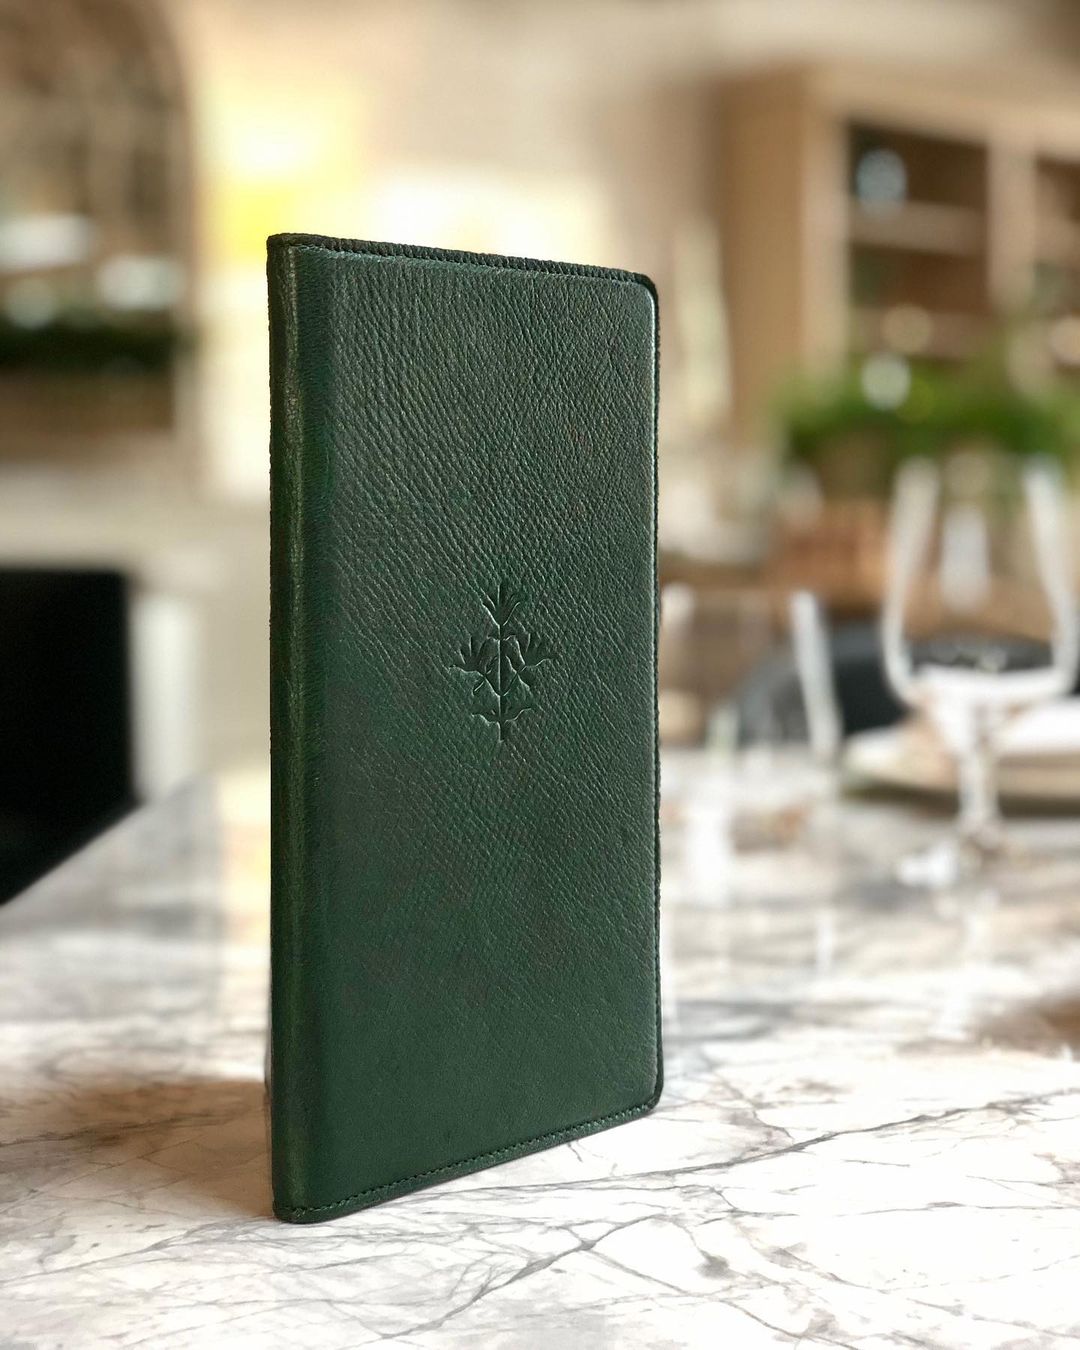 Billy Tannery Bespoke Leather Menu Cover - Ox Barn Thyme